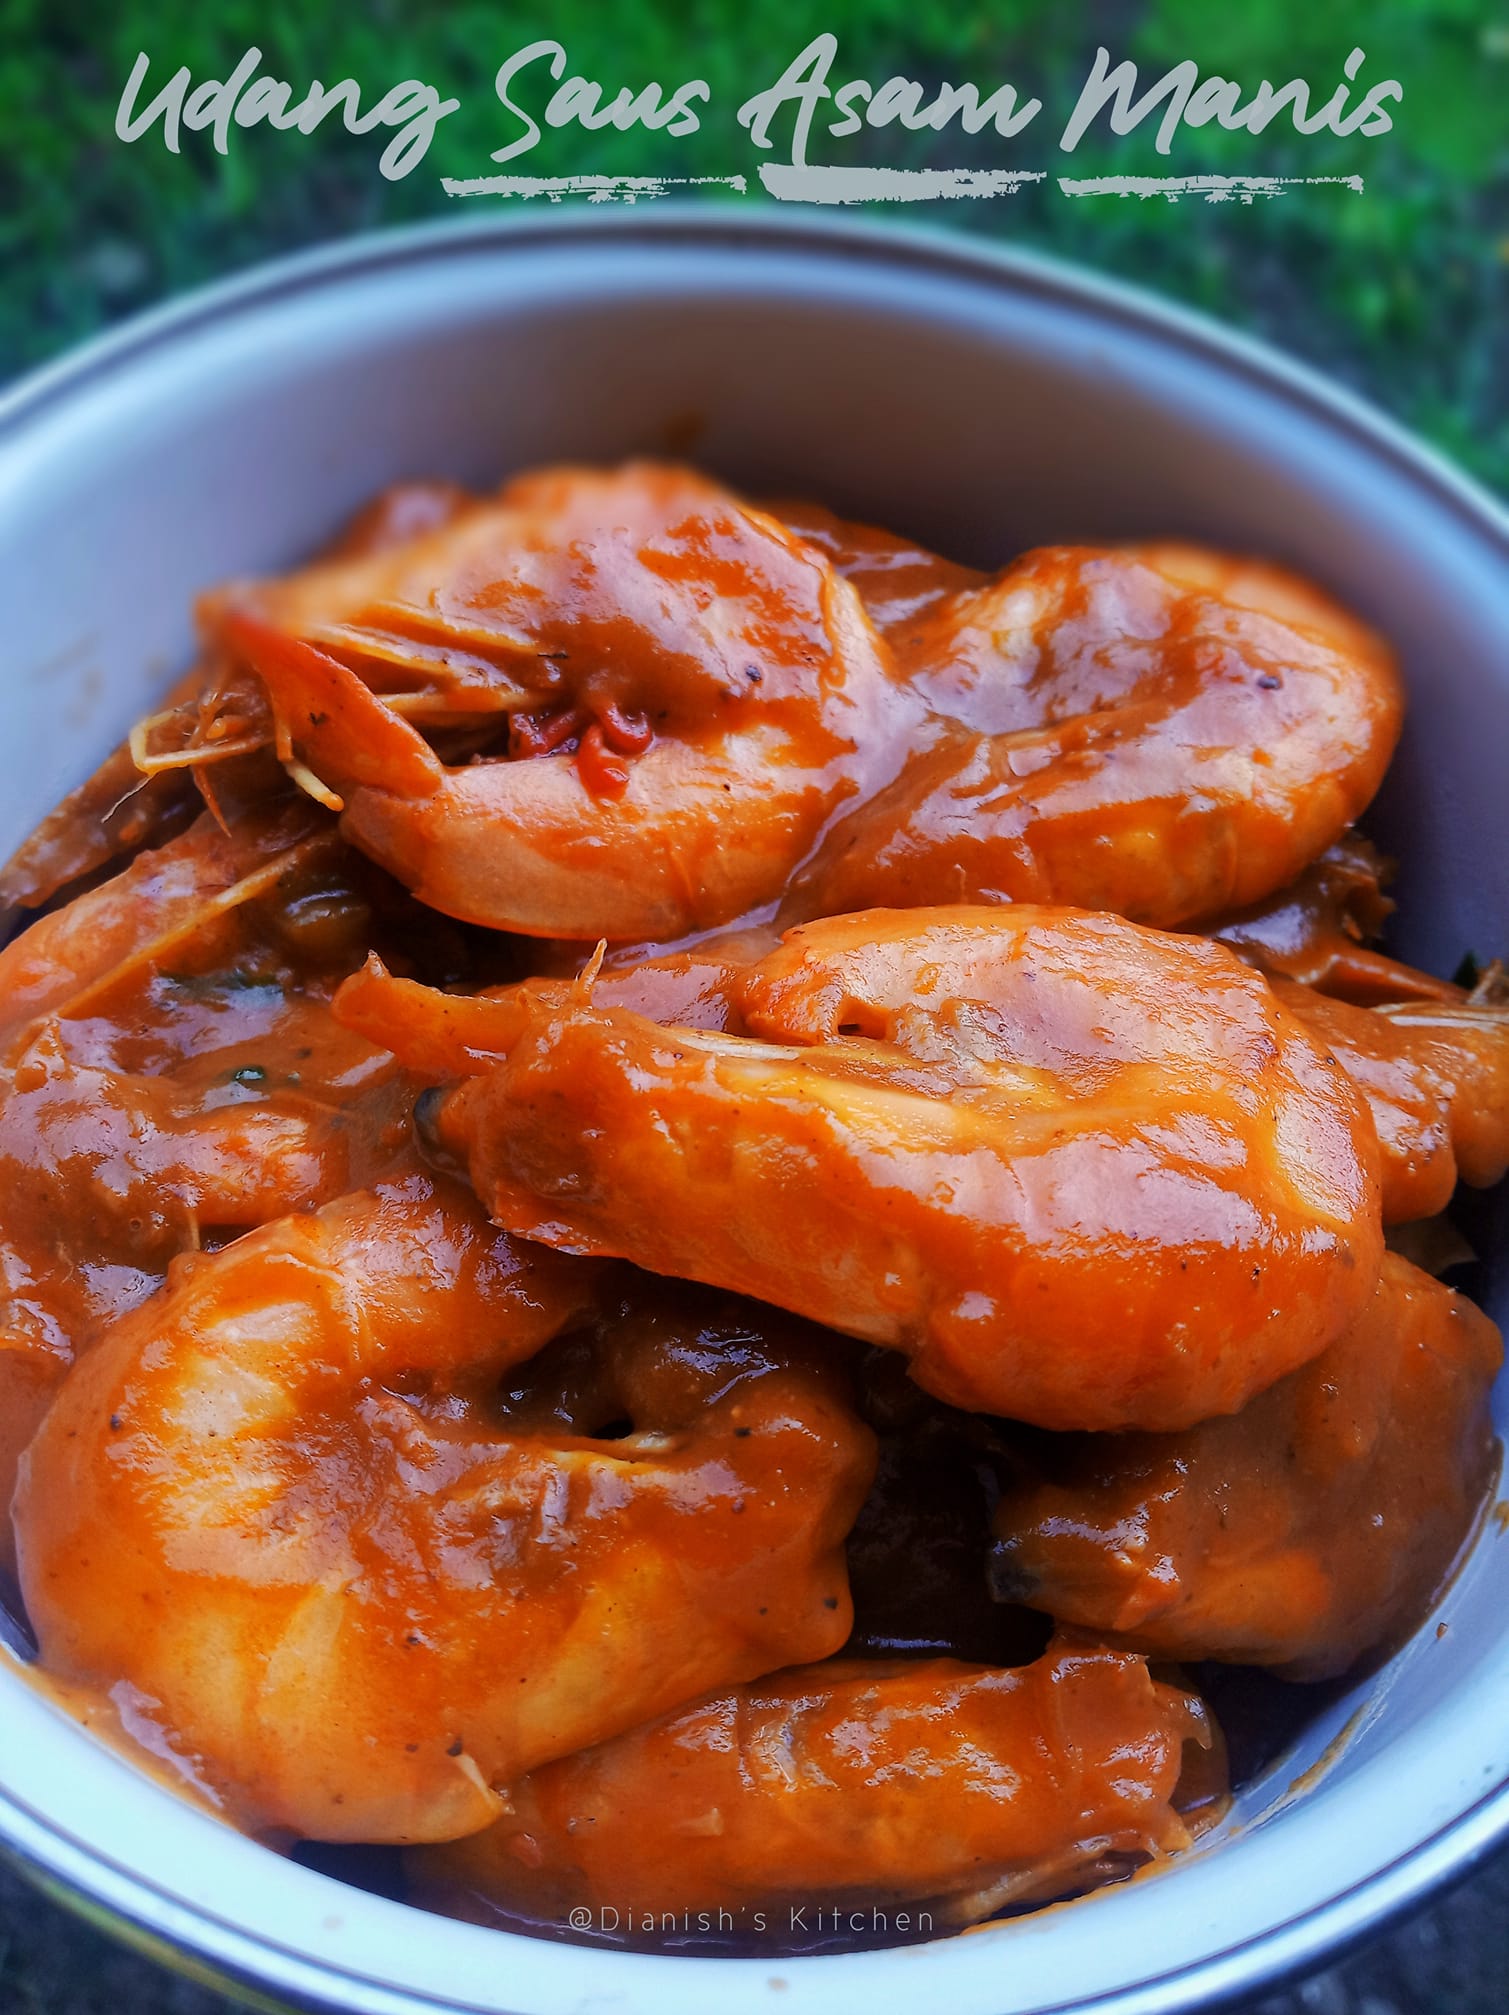 resep UDANG SAUS ASAM MANIS by Dianish's Kitchen